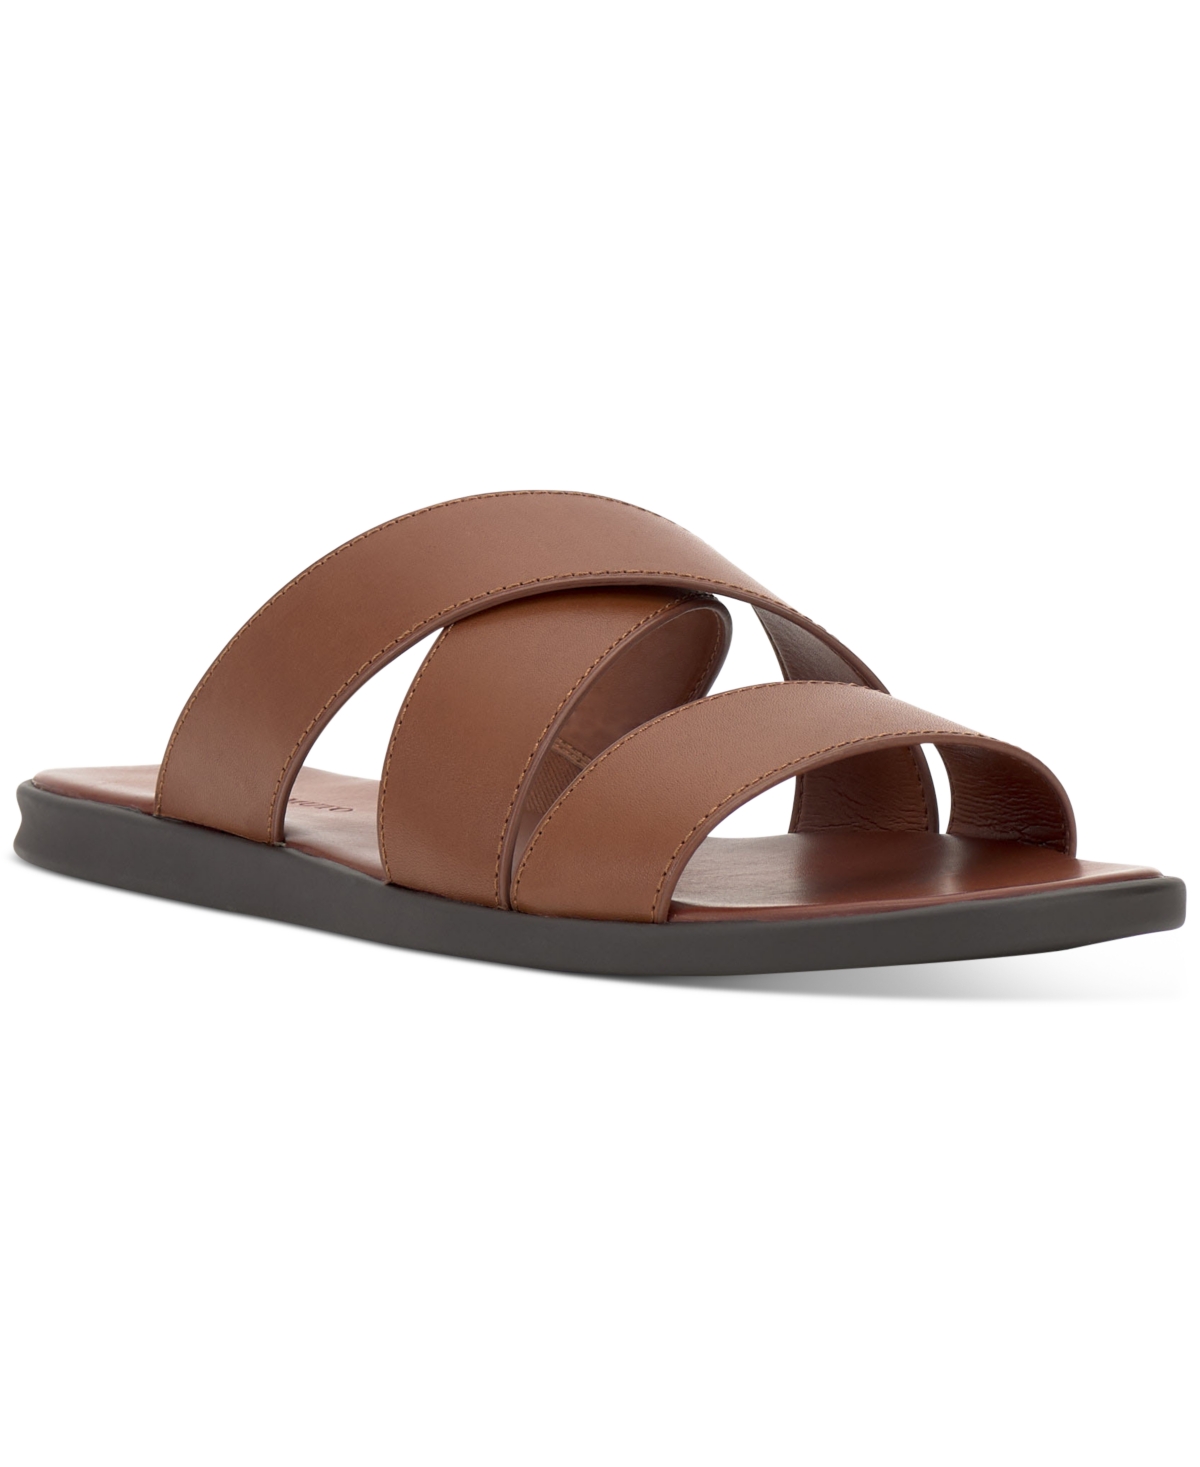 VINCE CAMUTO MEN'S WAELY CASUAL LEATHER SANDAL